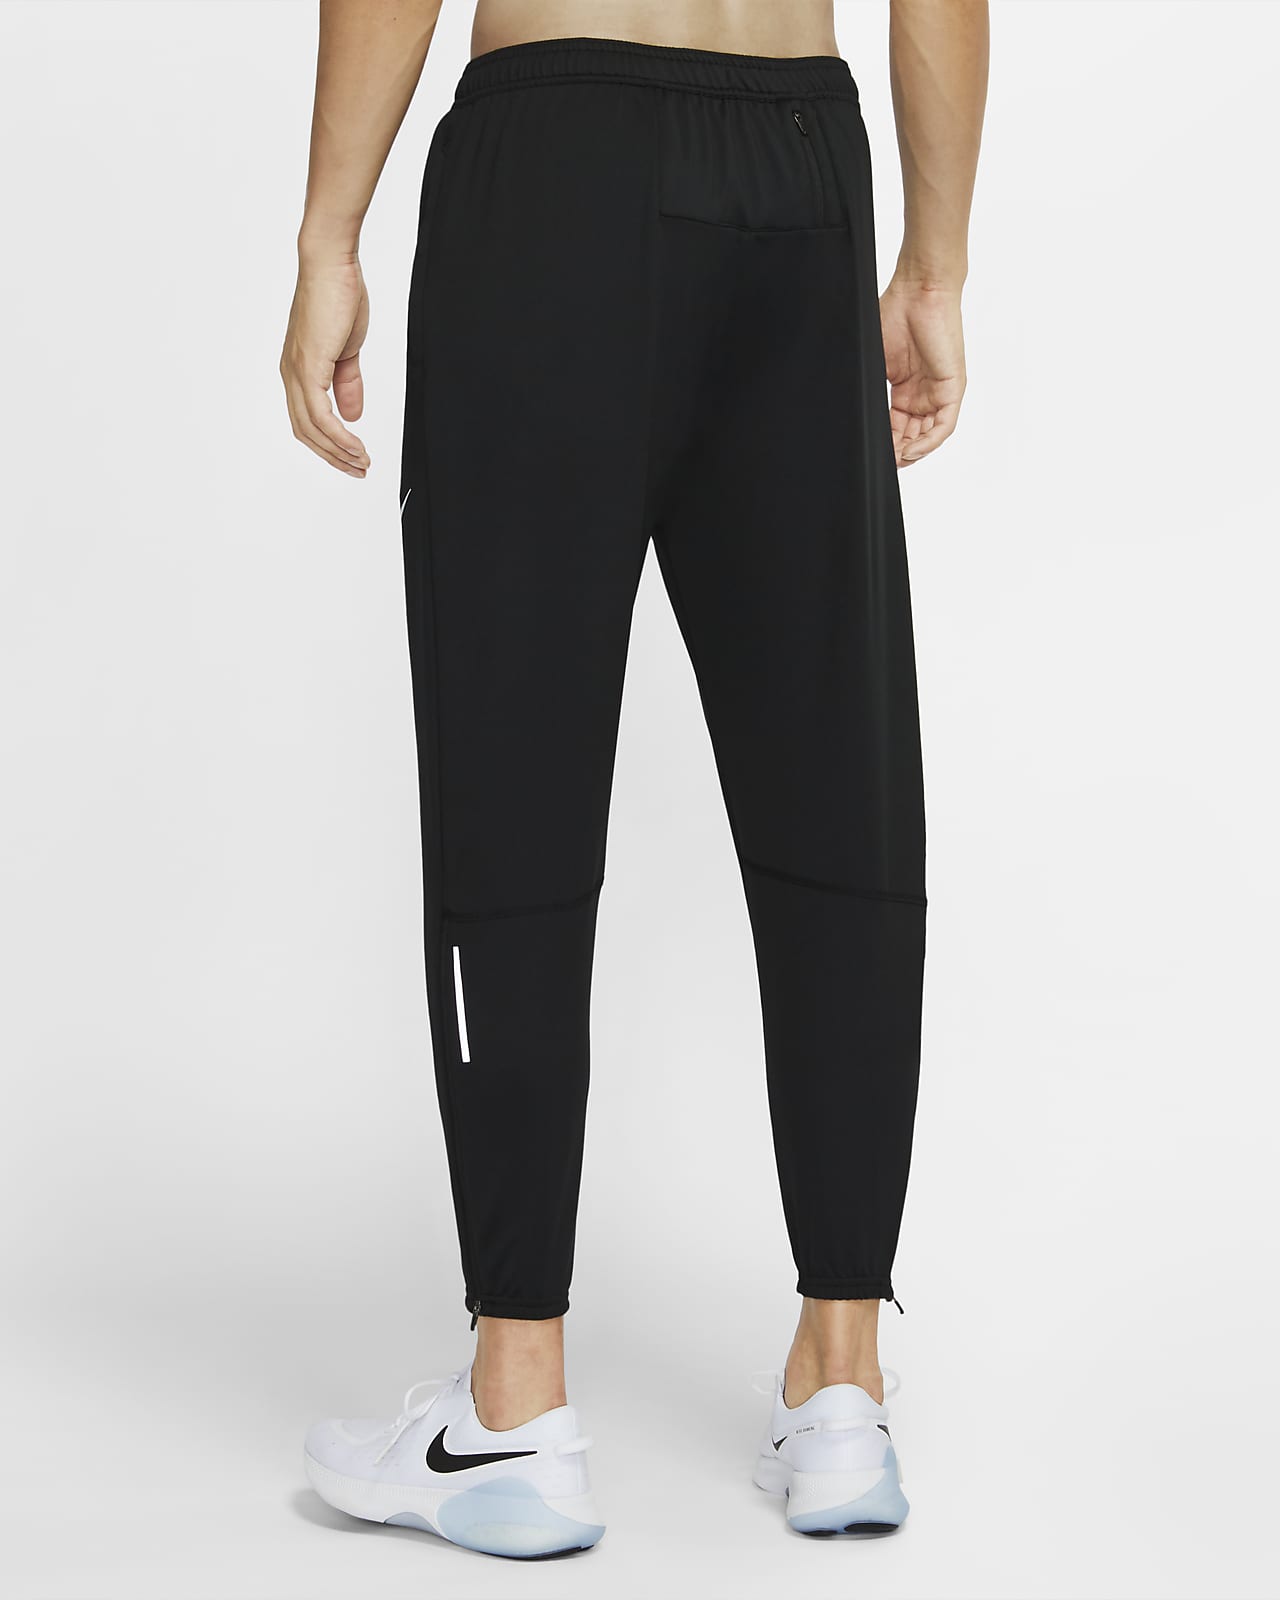 men's knit running trousers nike essential